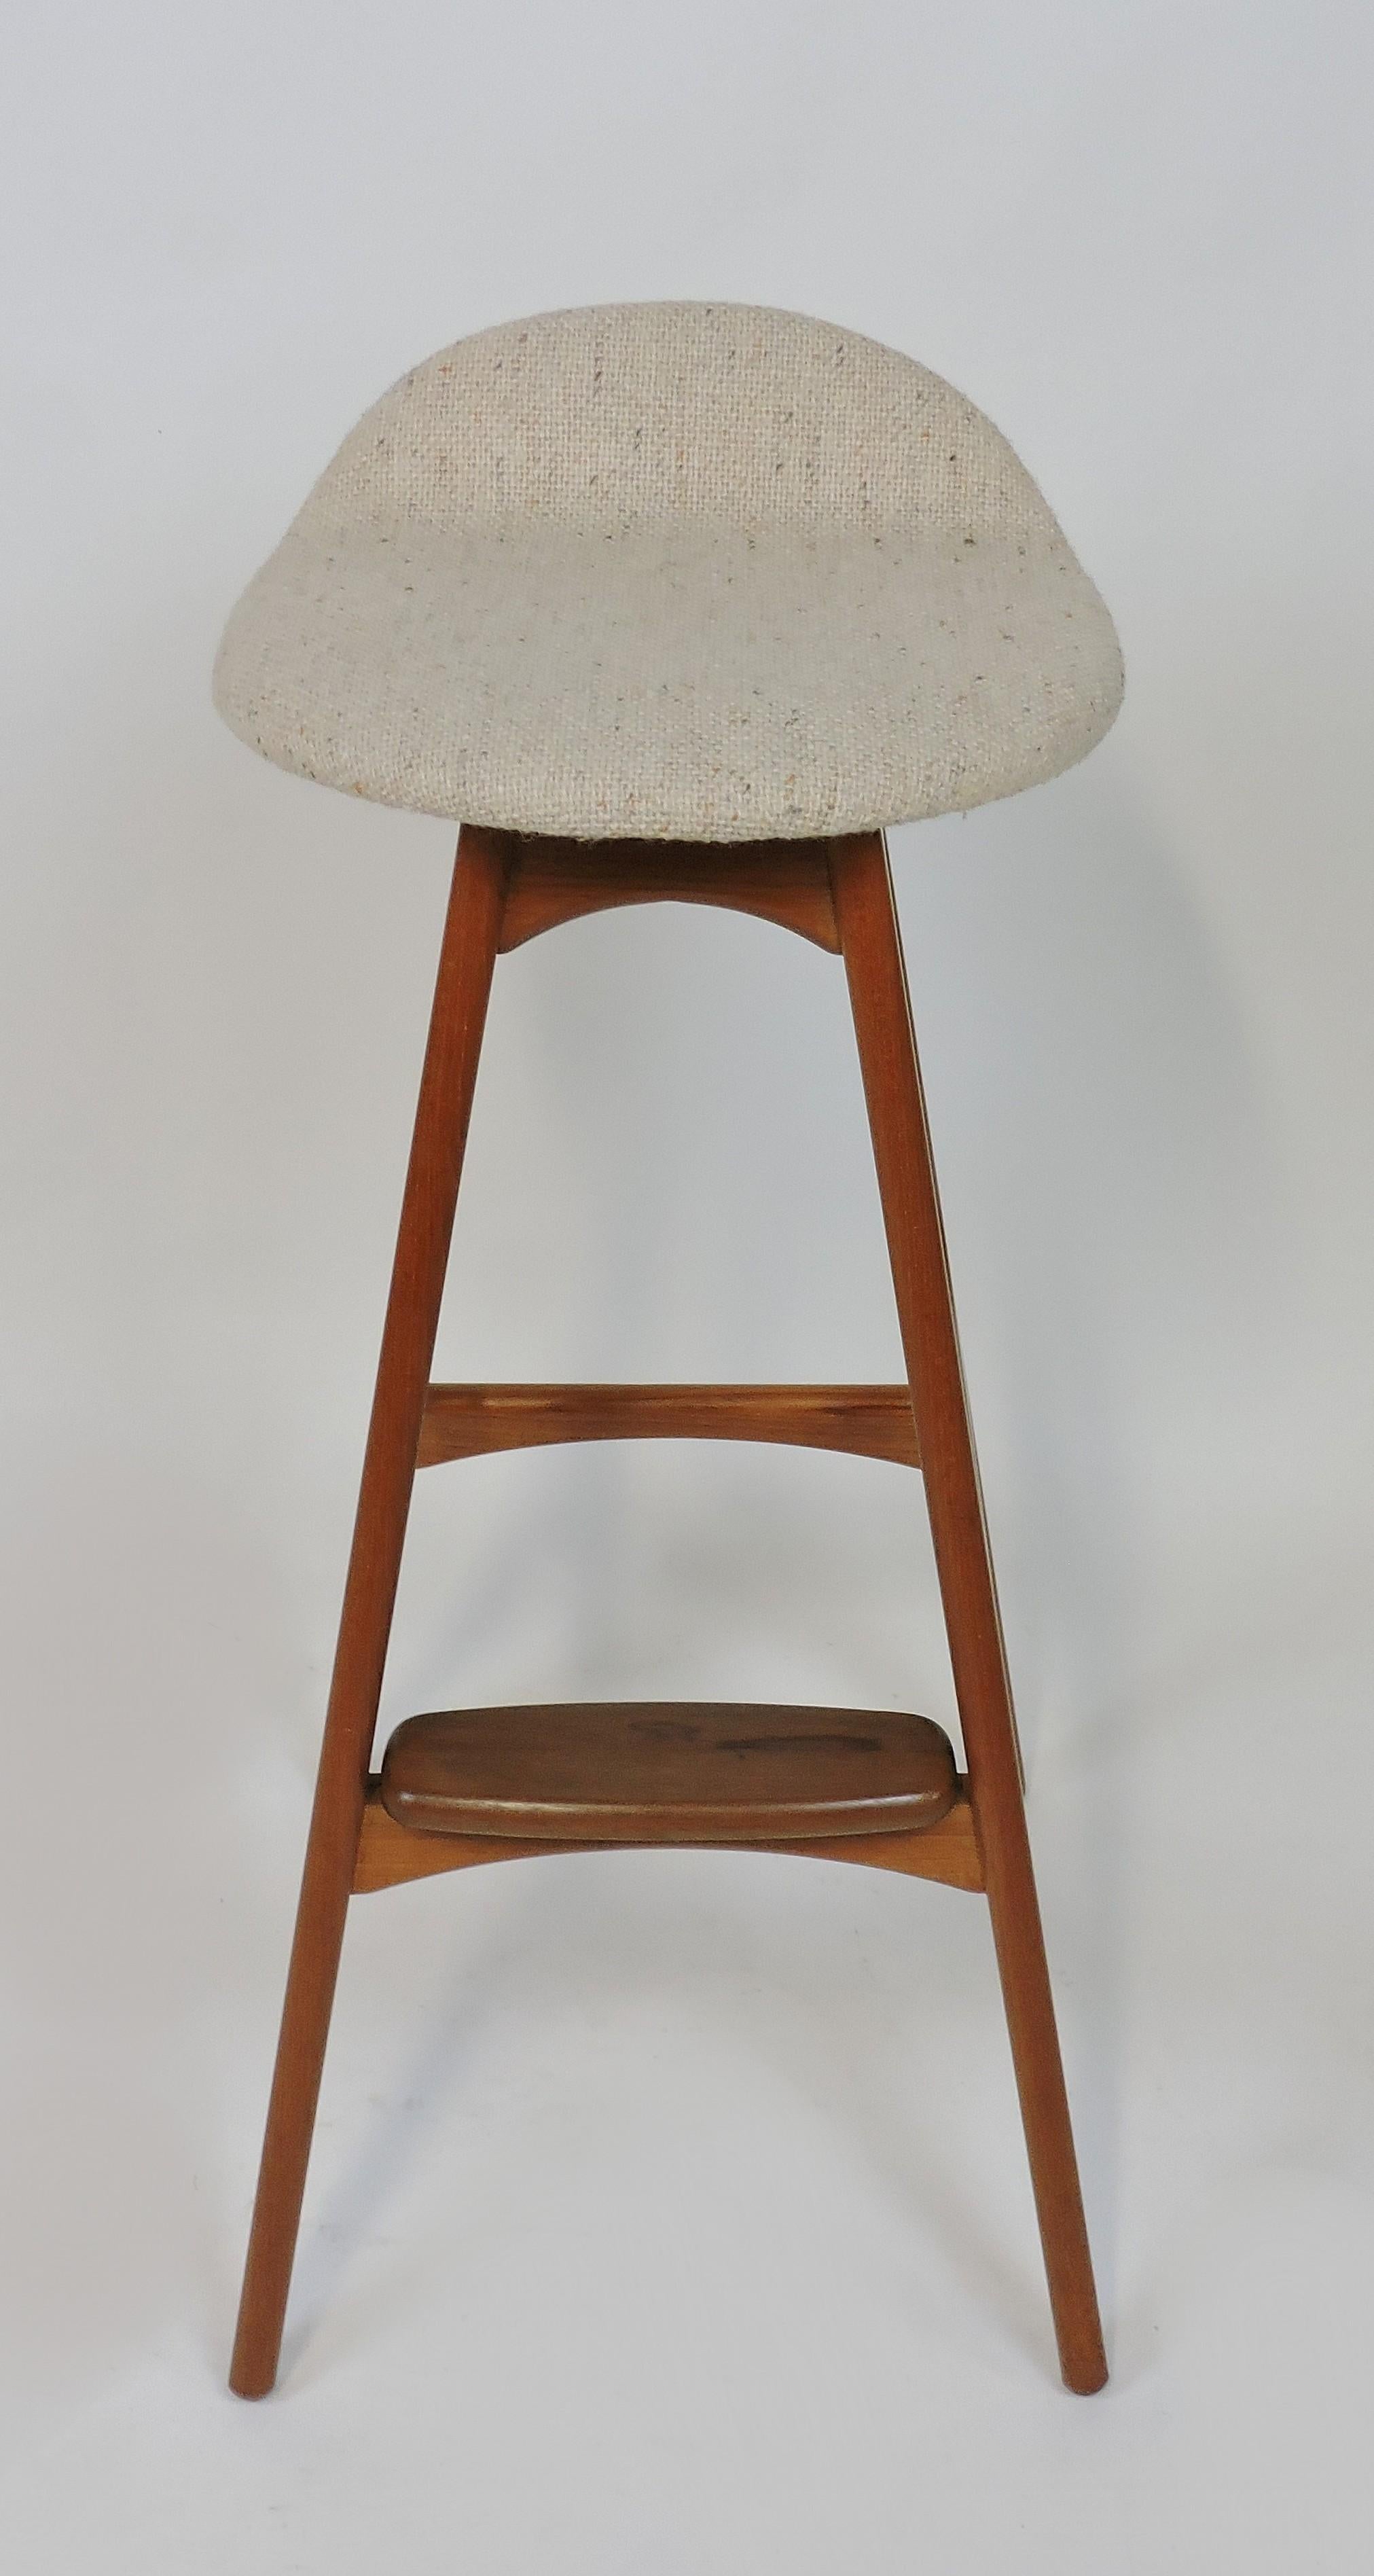 Sleek Danish modern counter stool designed by Erik Buch and made in Denmark by O.D. Mobler. This stool is made of solid sculpted teak and rosewood with a curved seat upholstered in the original beige fleck hopsack fabric. Labeled - Made in Denmark,